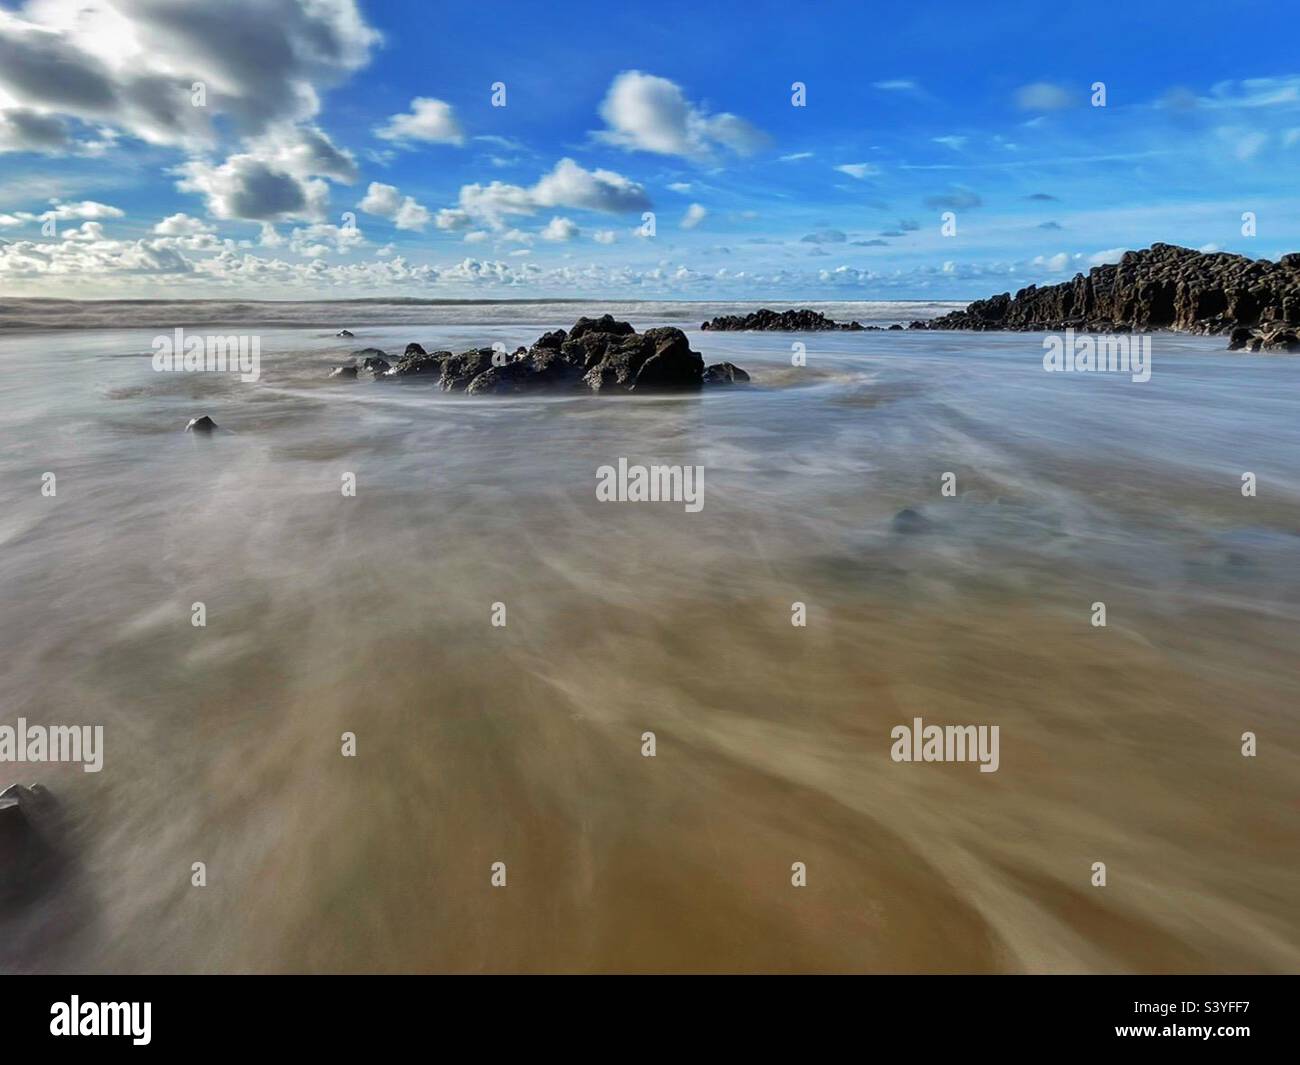 Mewslade beach, Gower, Swansea, Wales. Incoming tide. Stock Photo